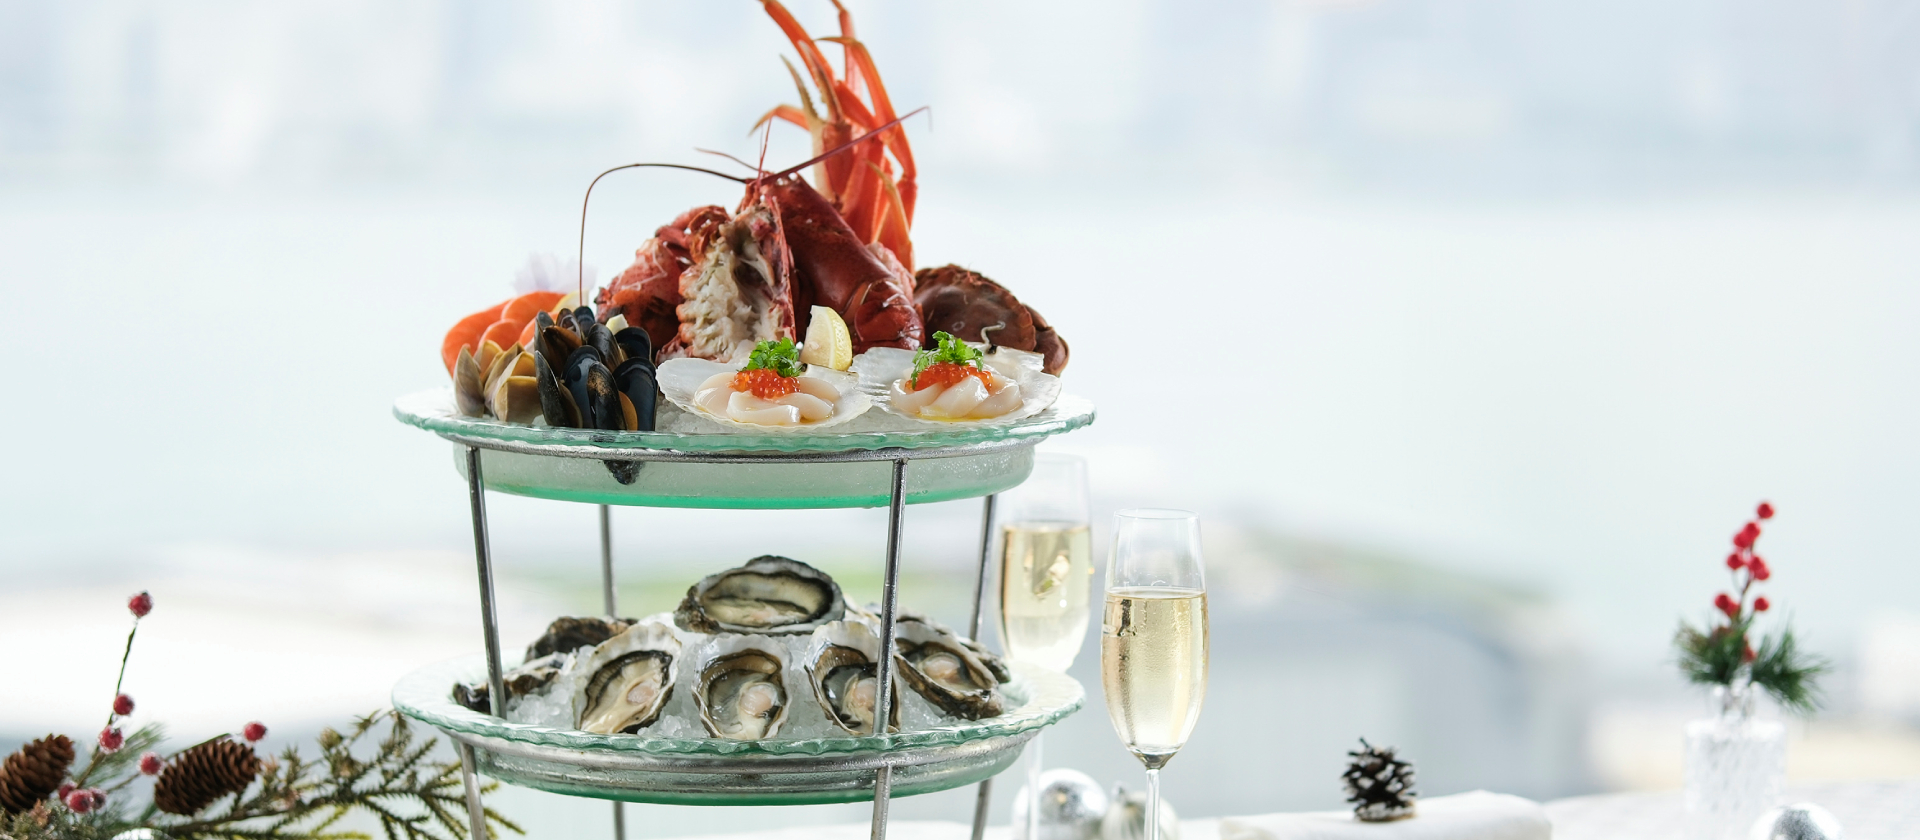 Oyster & Wine Bar - Seafood Sunday Brunch with a View - Exclusive 10% savings for Marriott Bonvoy® Members 